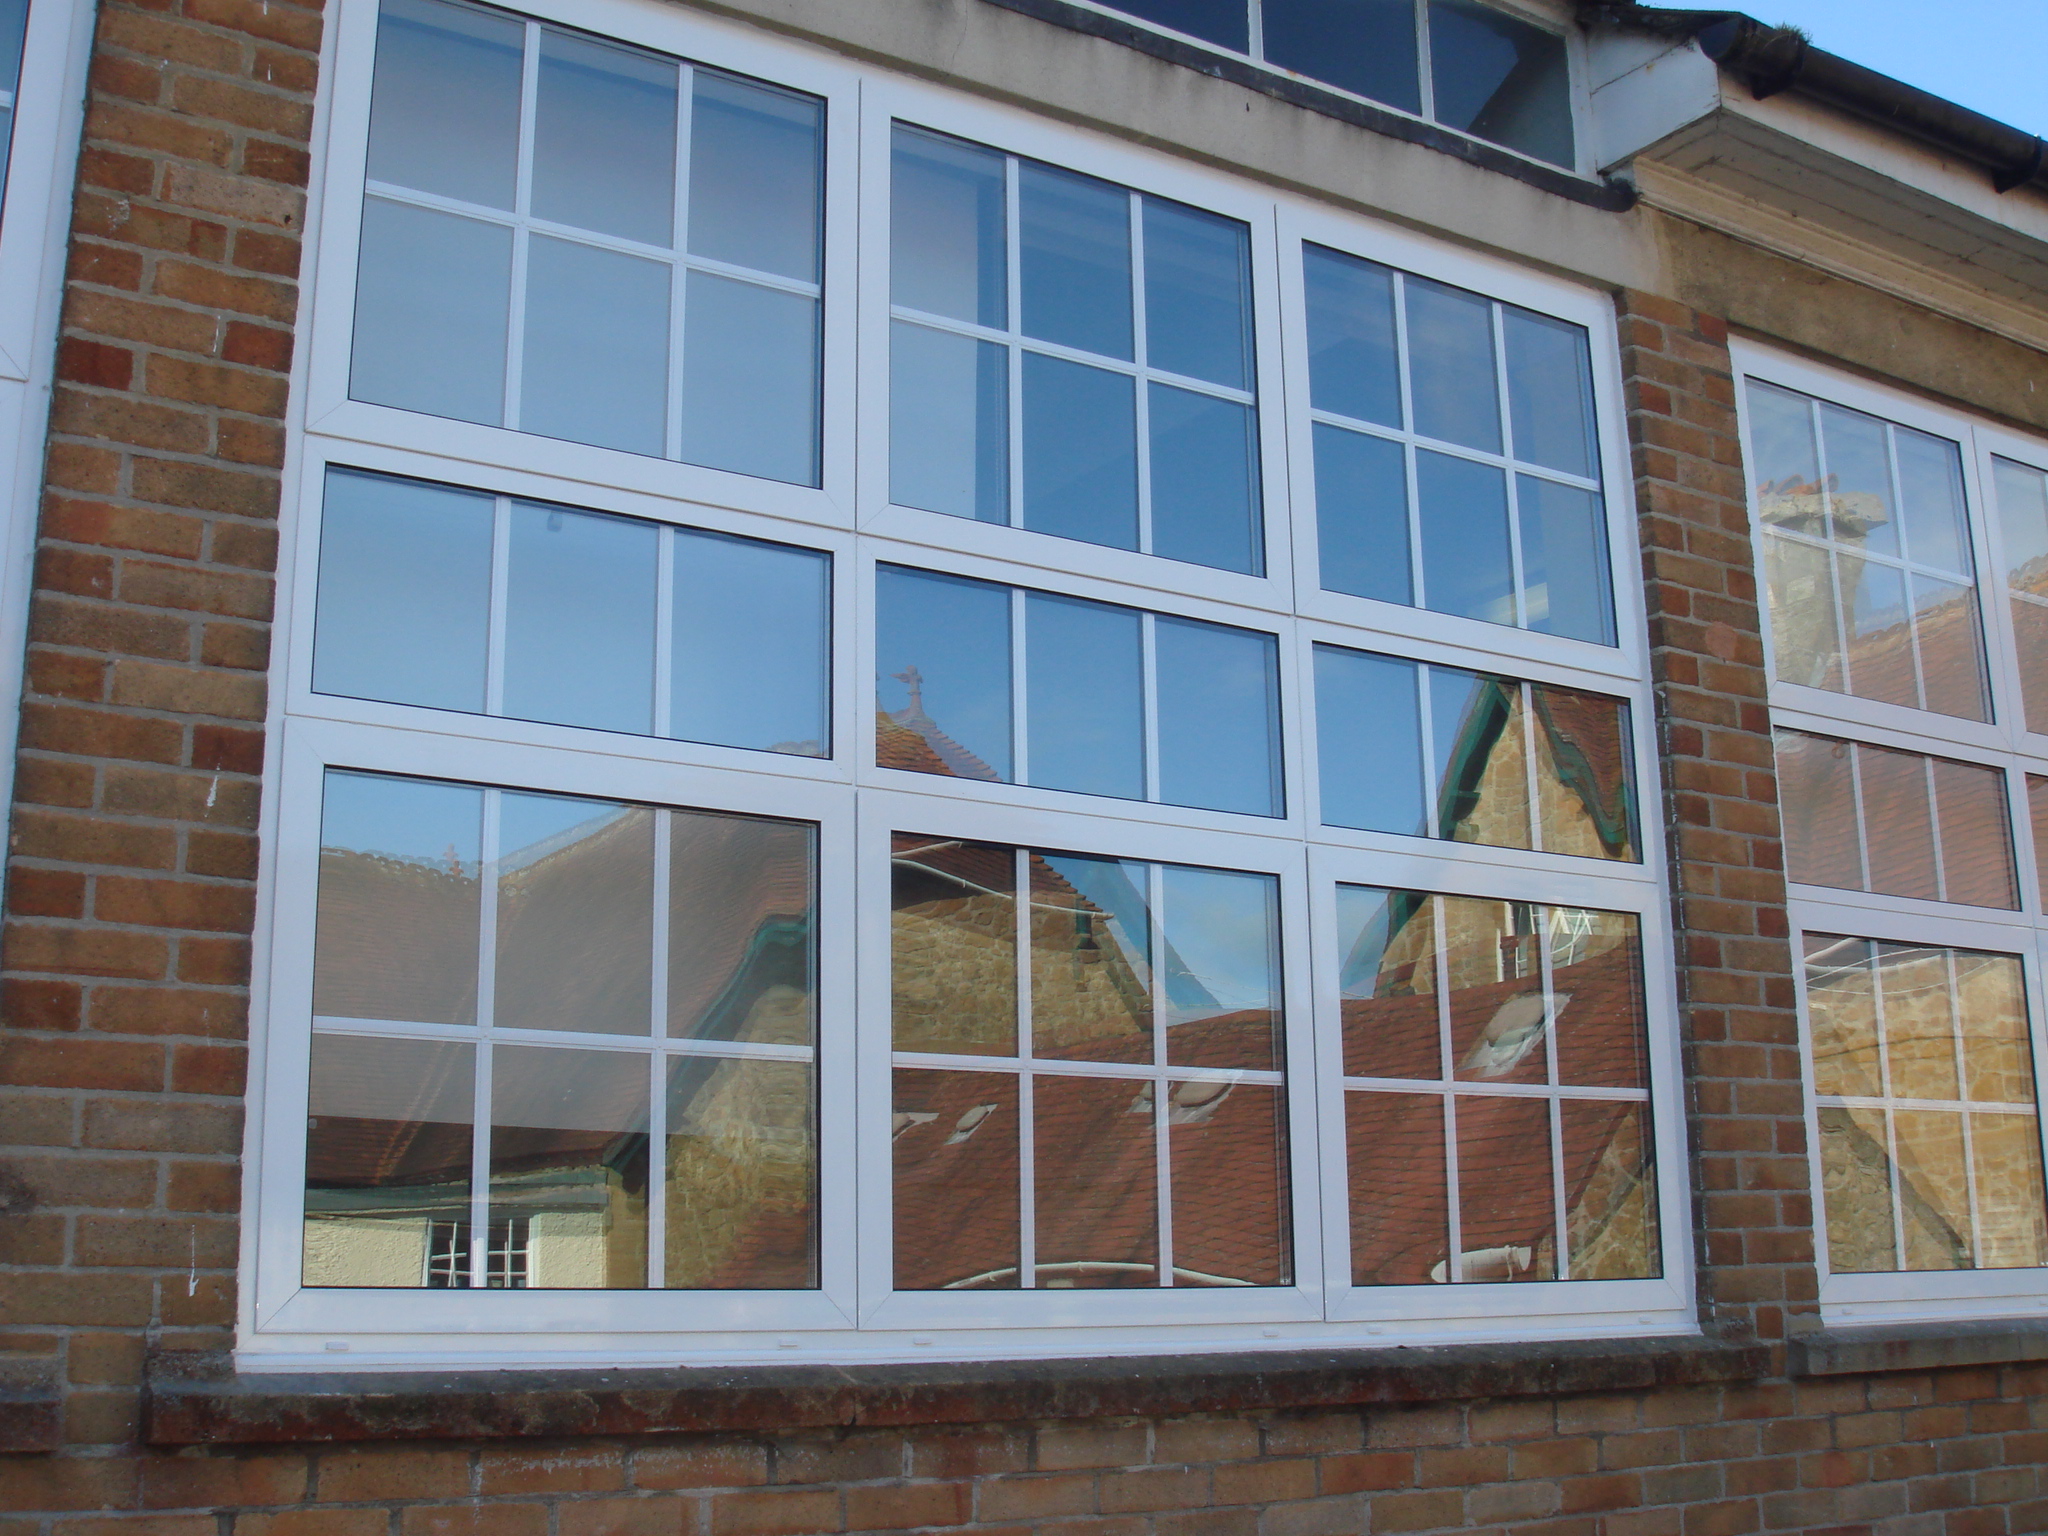 Weather Proof Stronger Than The Typical Upvc Window And Door System